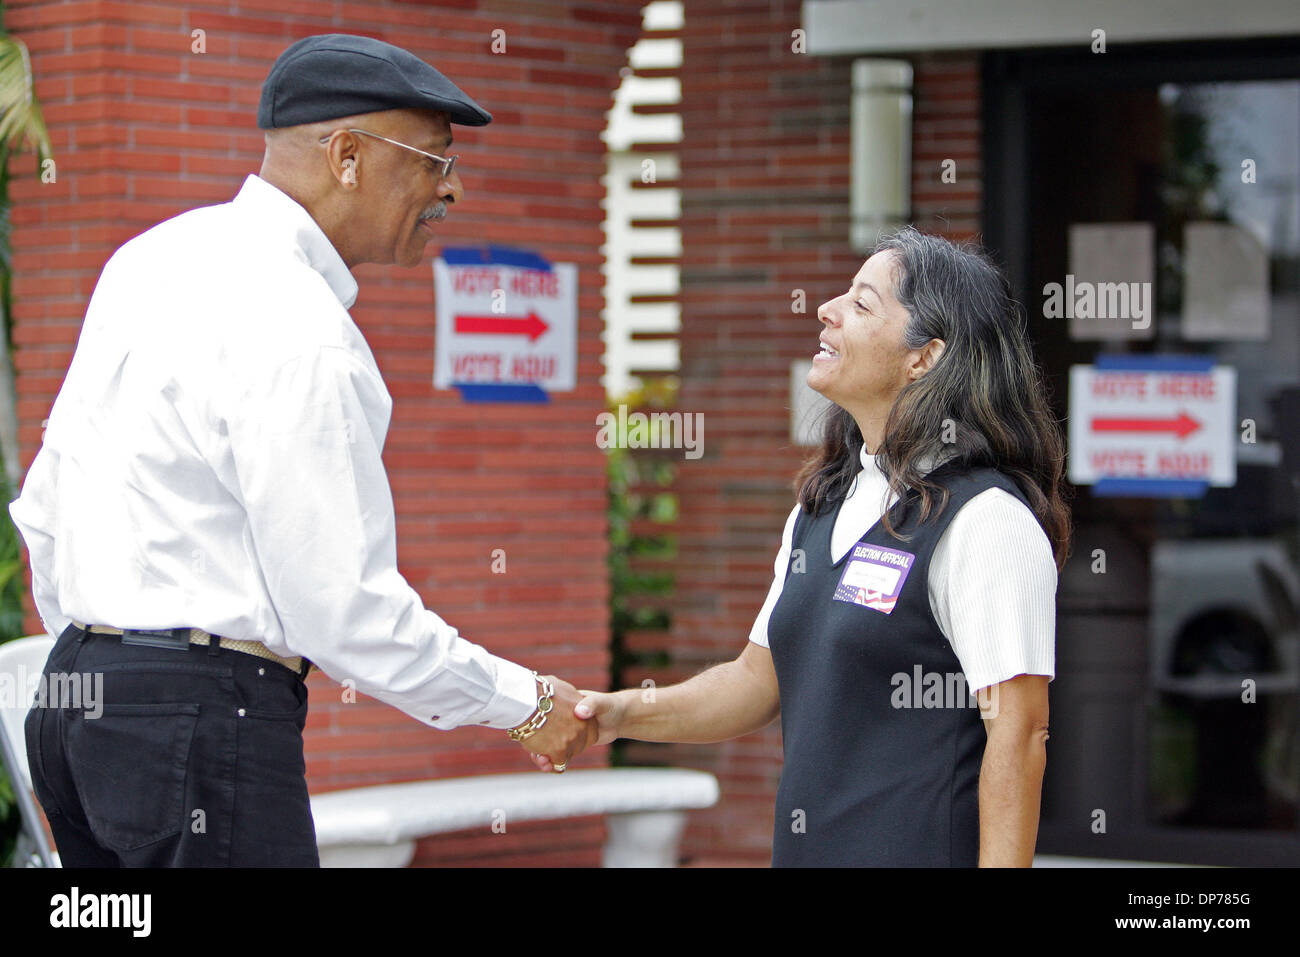 Nov 07, 2006; West Palm Beach, FL, USA; Supervisor of Elections Dr. Arthur Anderson shakes hands with precinct clerk Peggy Lopez outside Holy Spirit Episcopal Church precinct #2070 while checking on voting progress Tuesday morning. Mandatory Credit: Photo by Richard Graulich/Palm Beach Post/ZUMA Press. (©) Copyright 2006 by Palm Beach Post Stock Photo